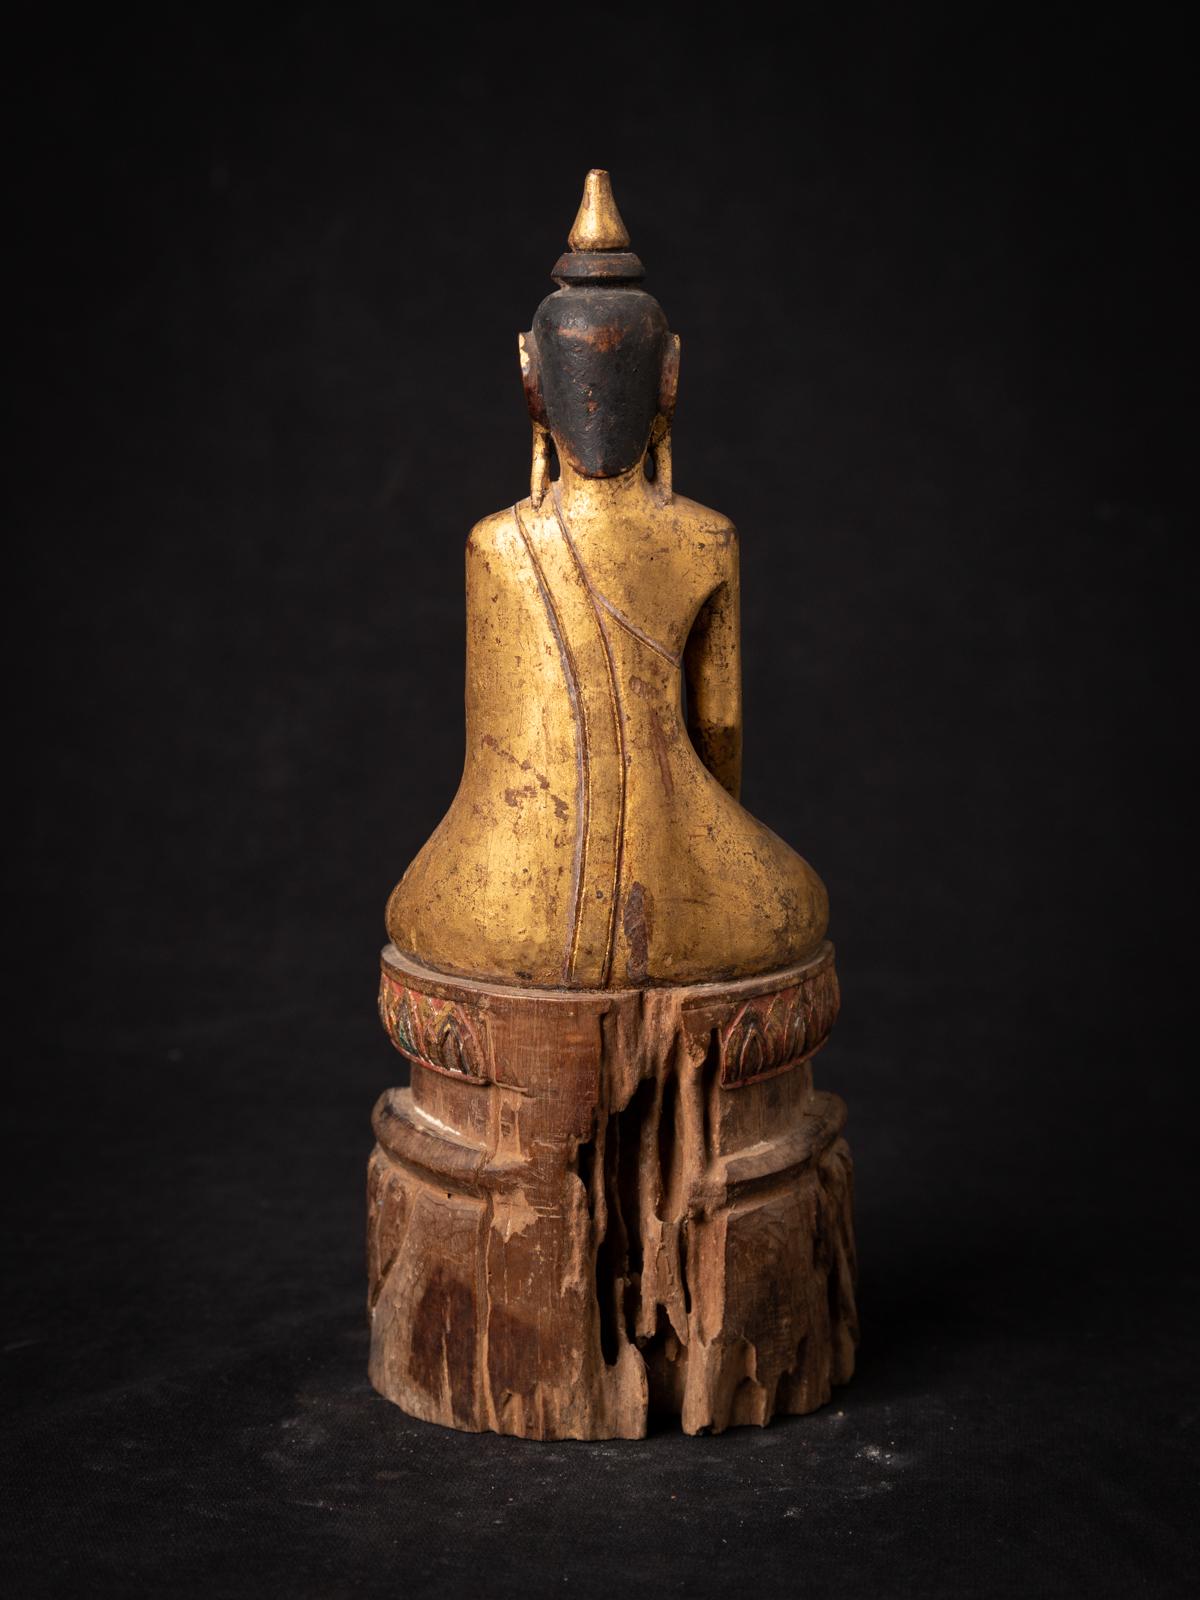 Wood Late 18th Century - Early 19th Century Antique wooden Thai Buddha statue